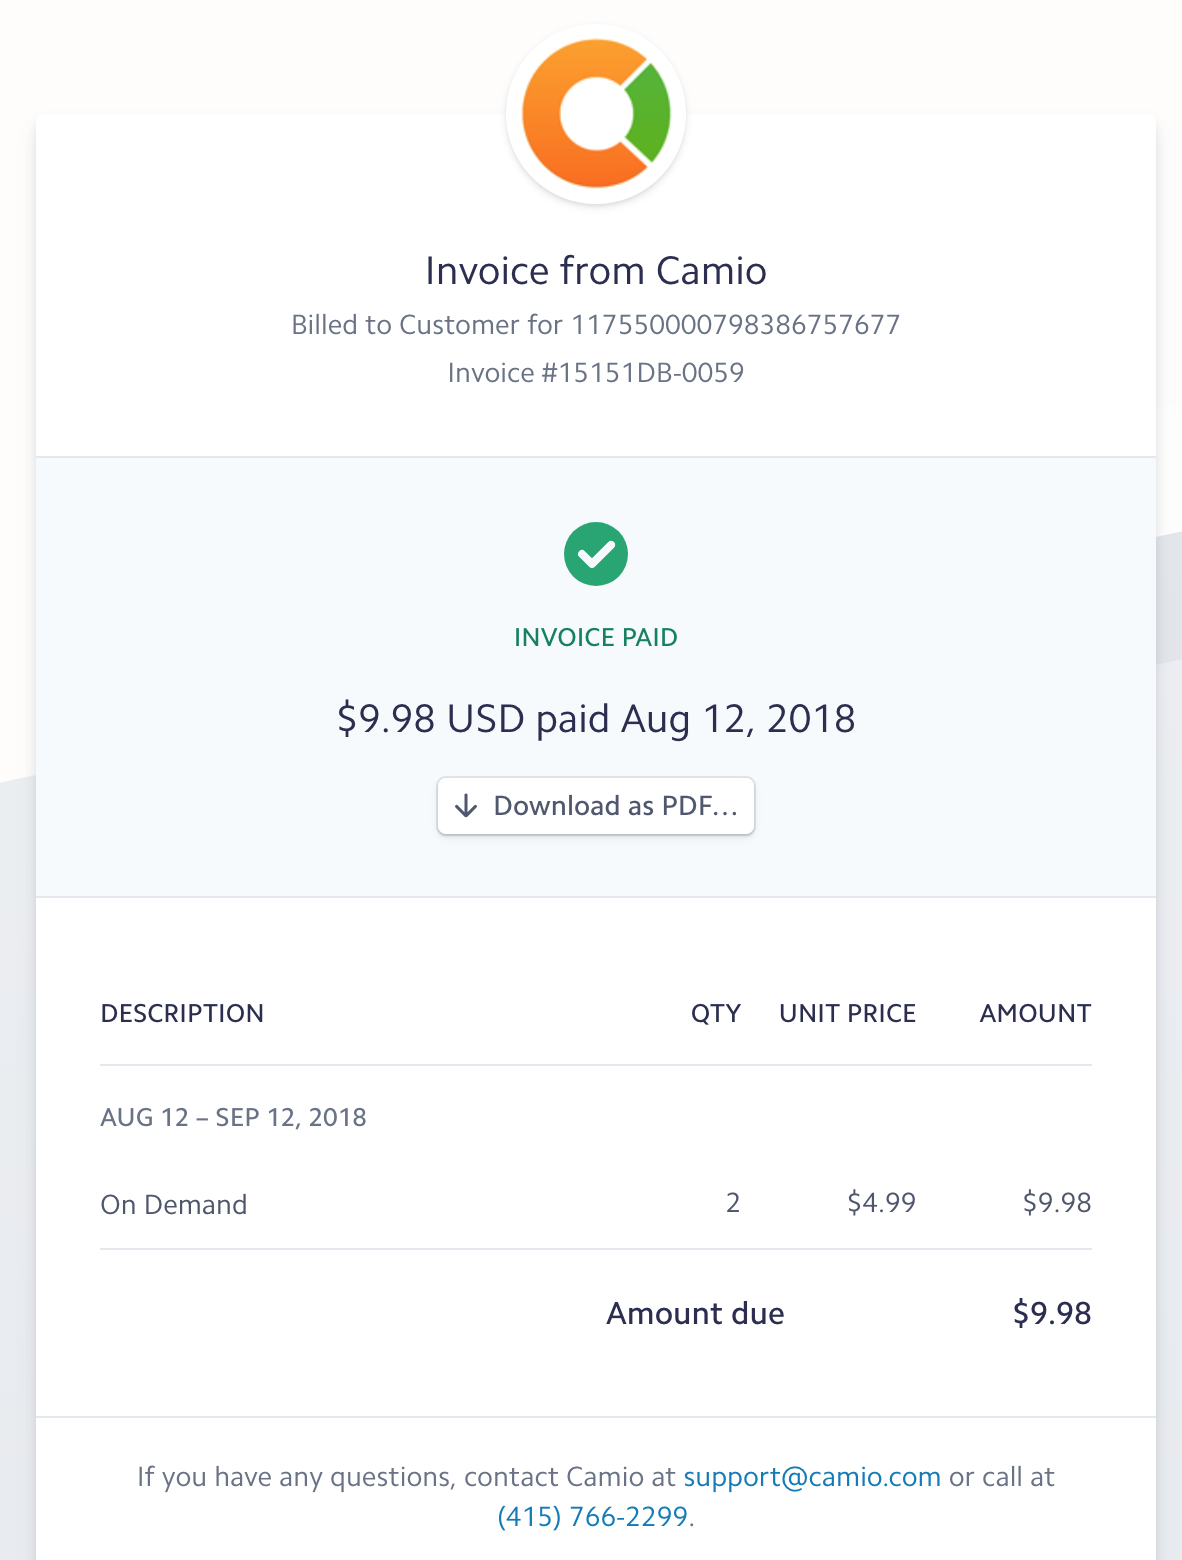 invoice_paid_Screen_Shot_2018-08-12_at_3.21.57_PM.png